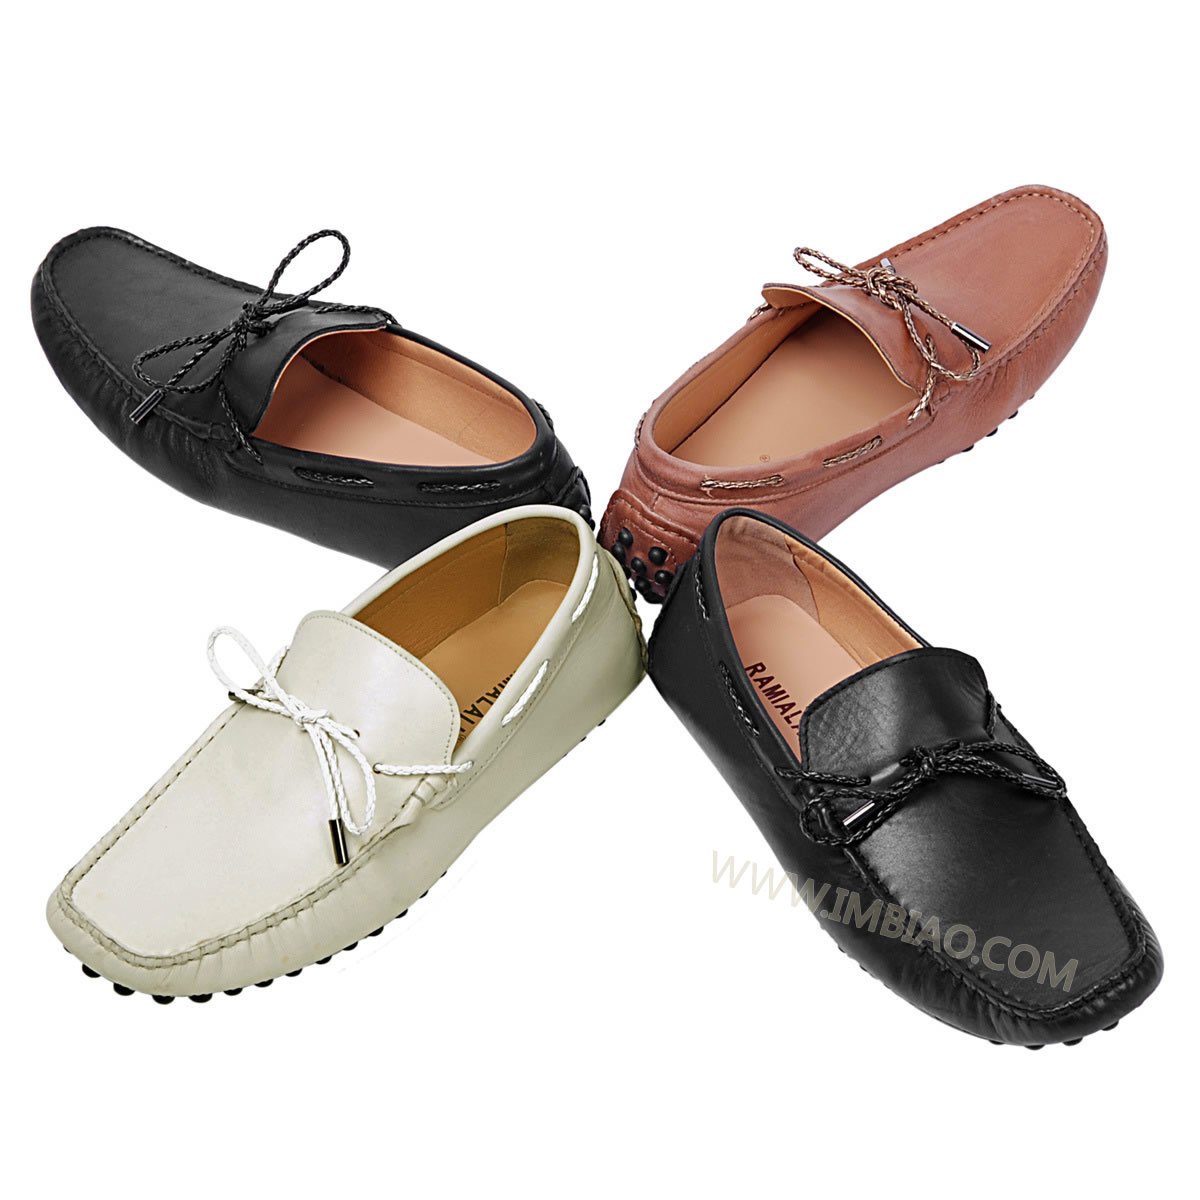 super soft leather mens shoes,fashion comfortable classic boat shoes for men on sale free ...